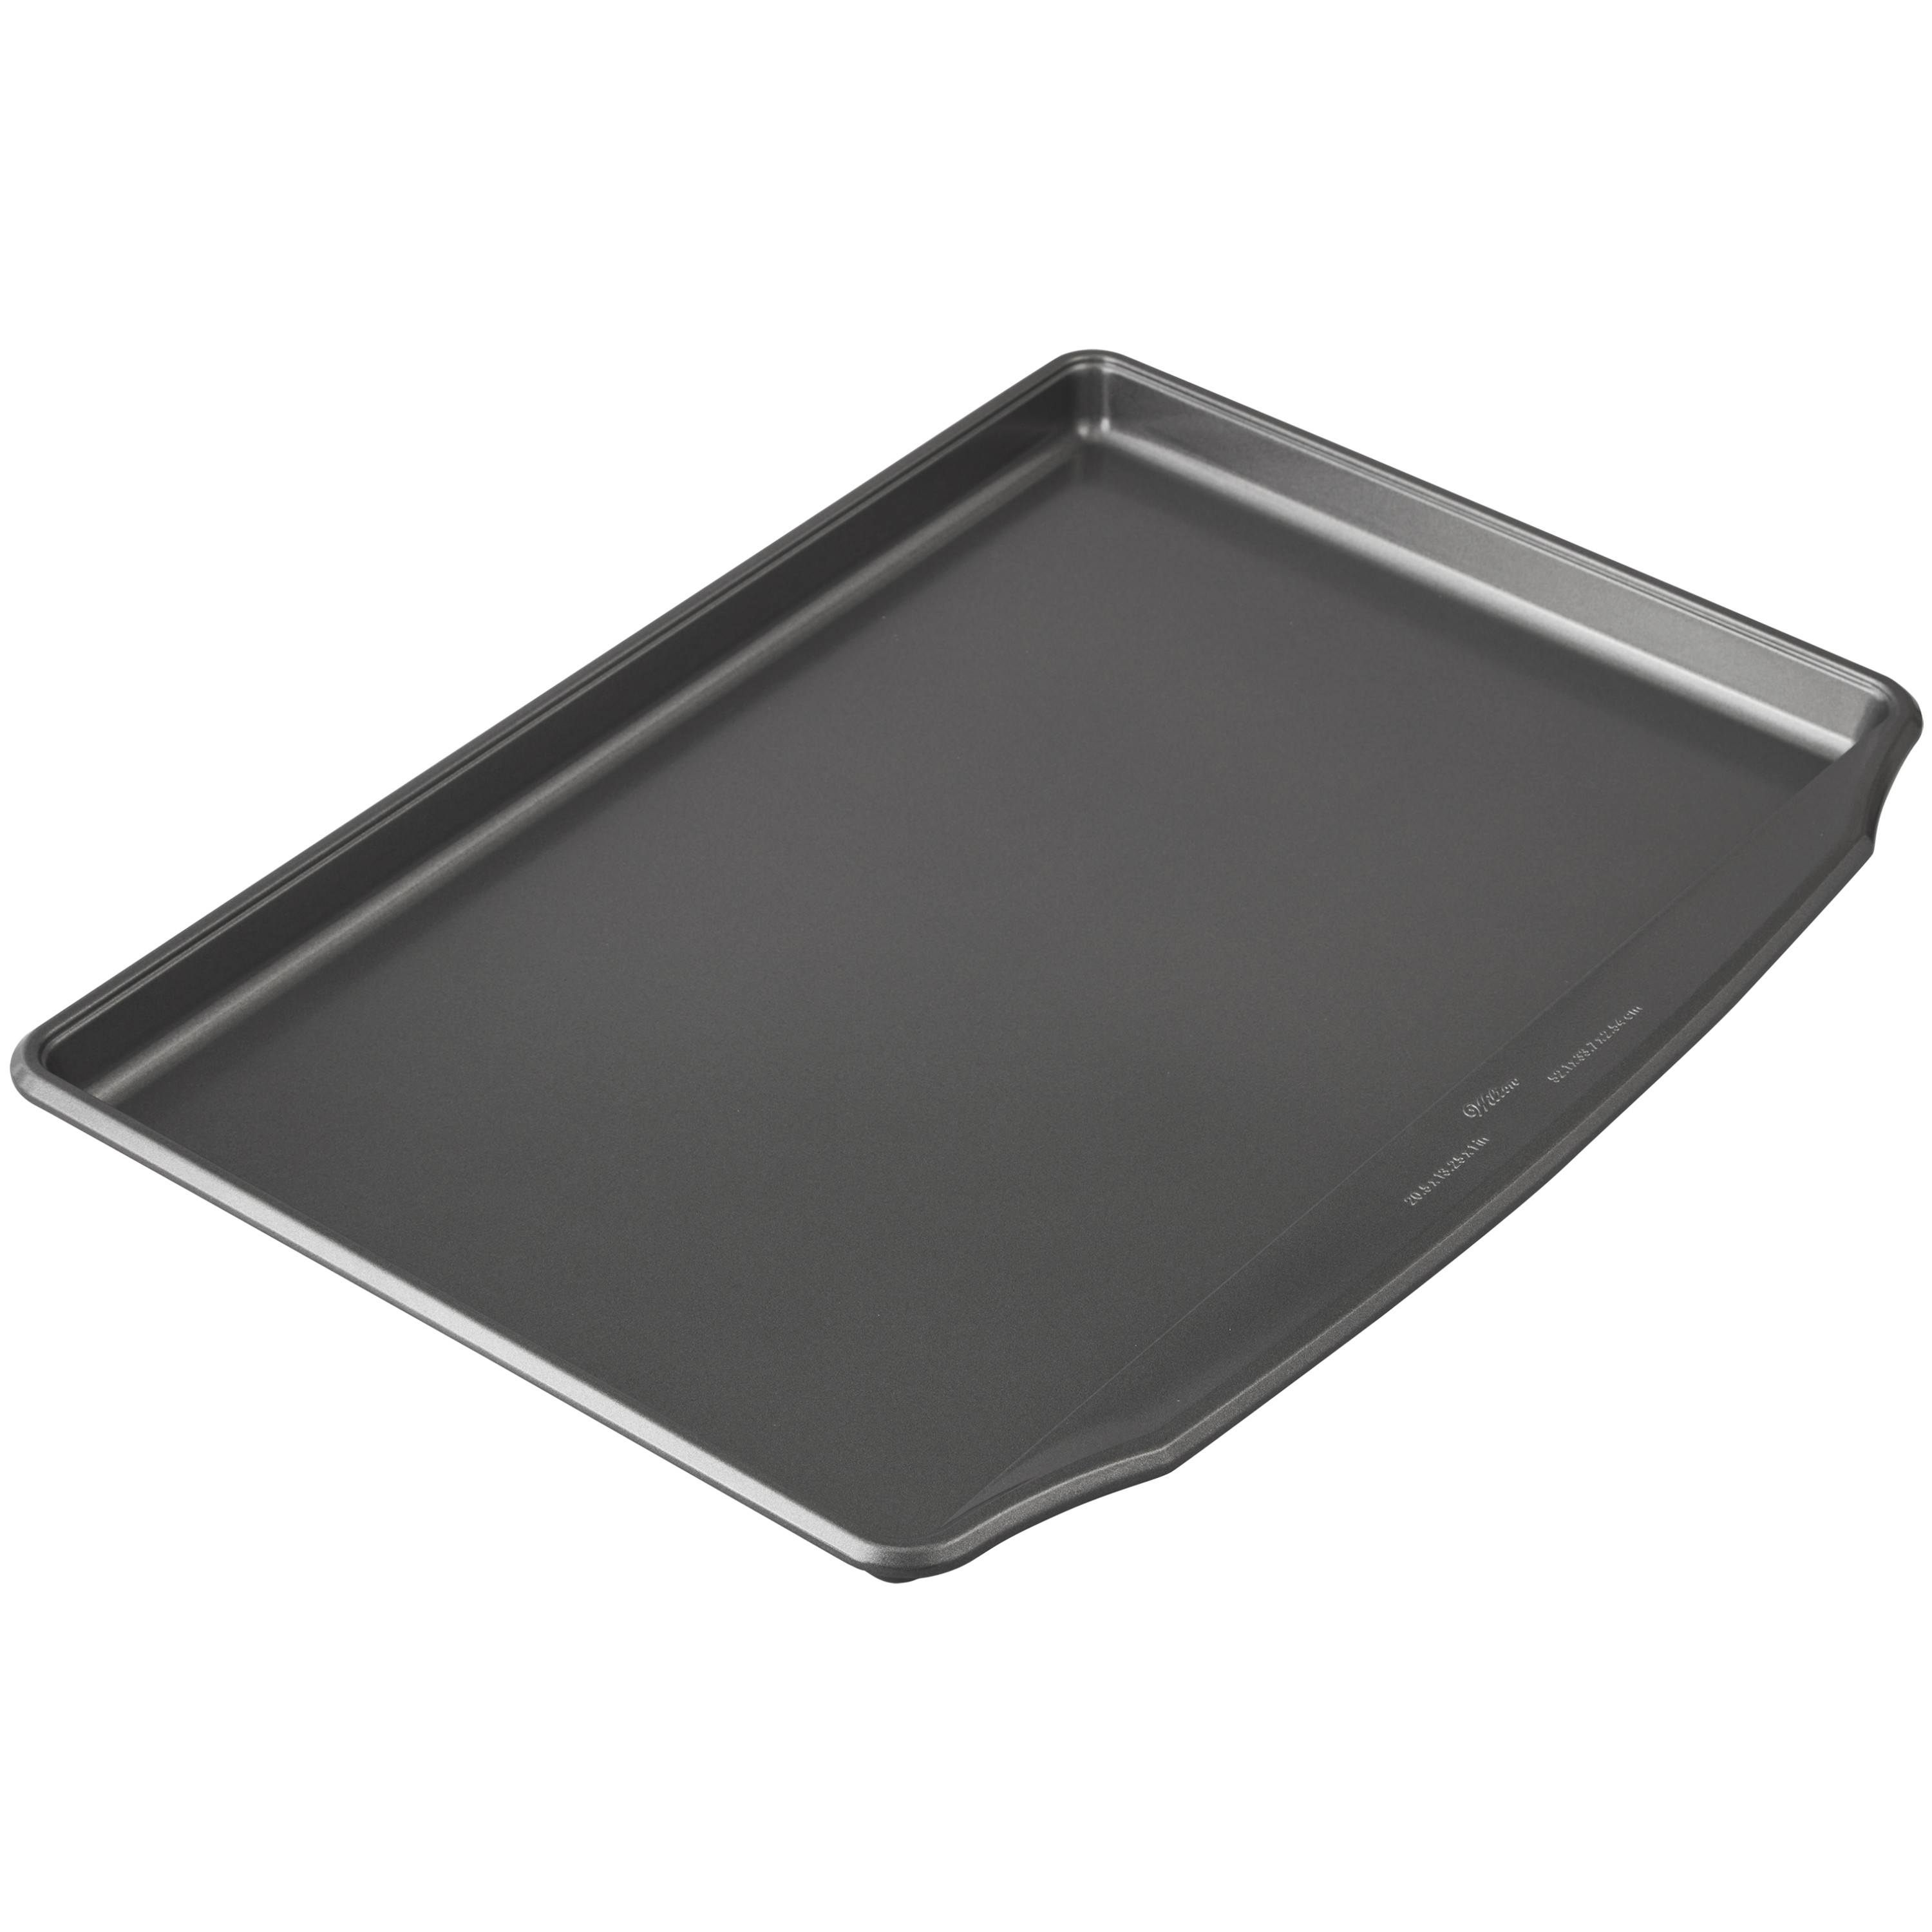 Wilton Bake It Better Steel Non-Stick Extra Large Cookie Sheet, 13 x 20-inch - image 4 of 8